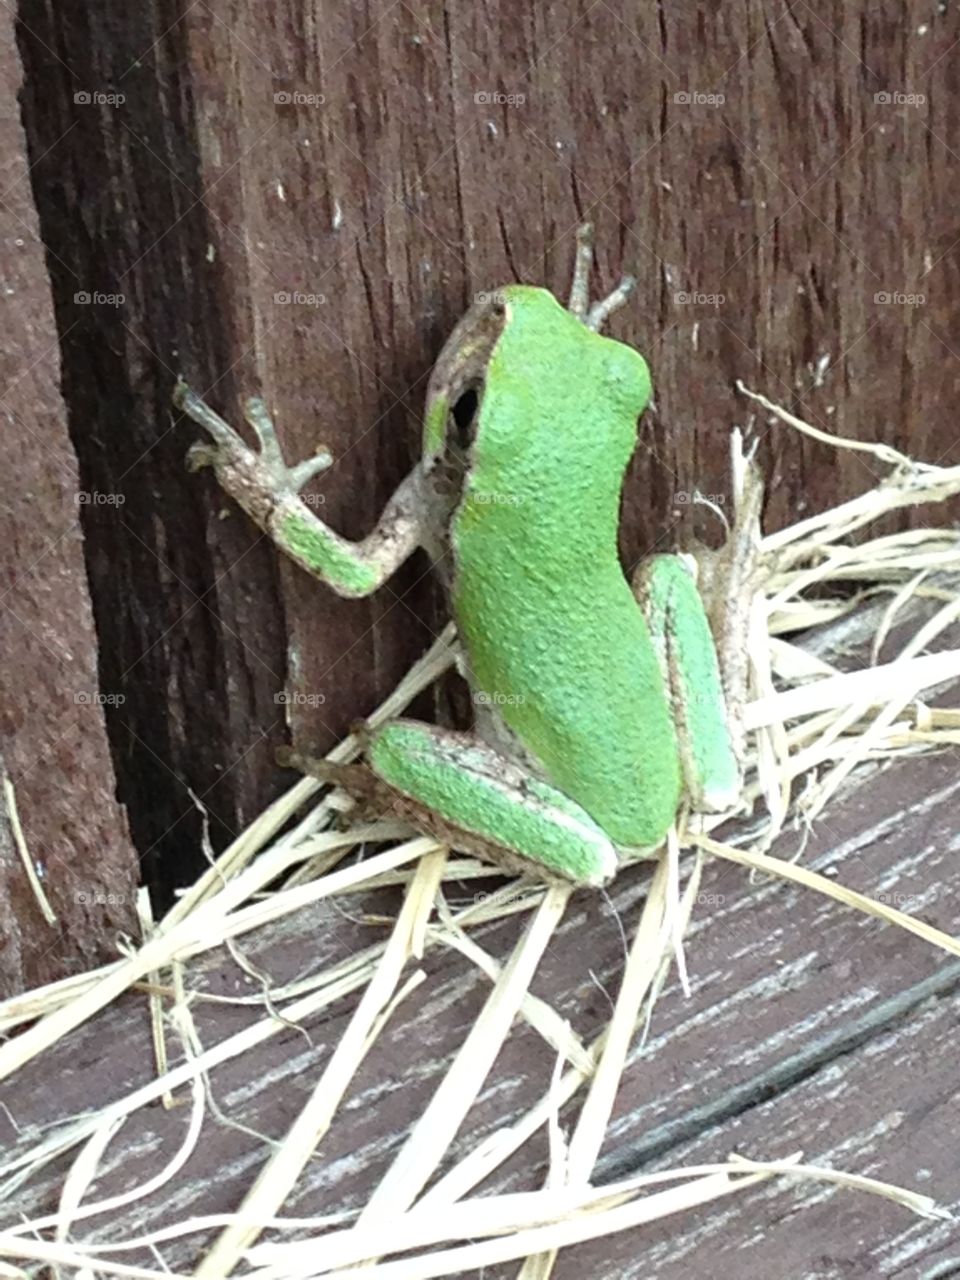 Little tree frog on the fence. Tiny little tree frog, on our fence!